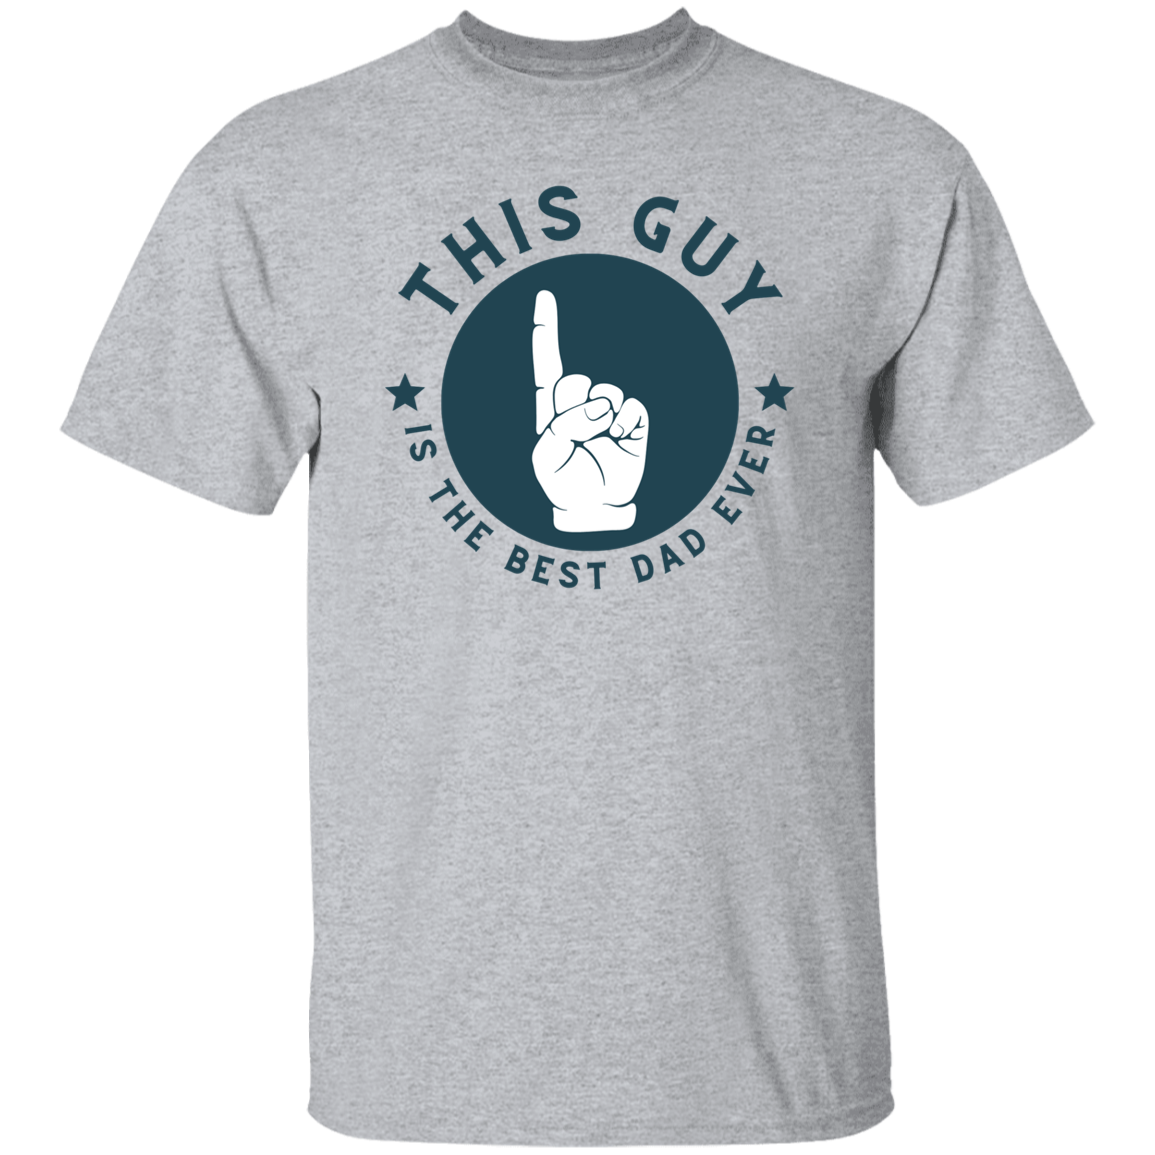 Father's Day | T-Shirt | This Guy | Best Dad Ever | Assorted Colors